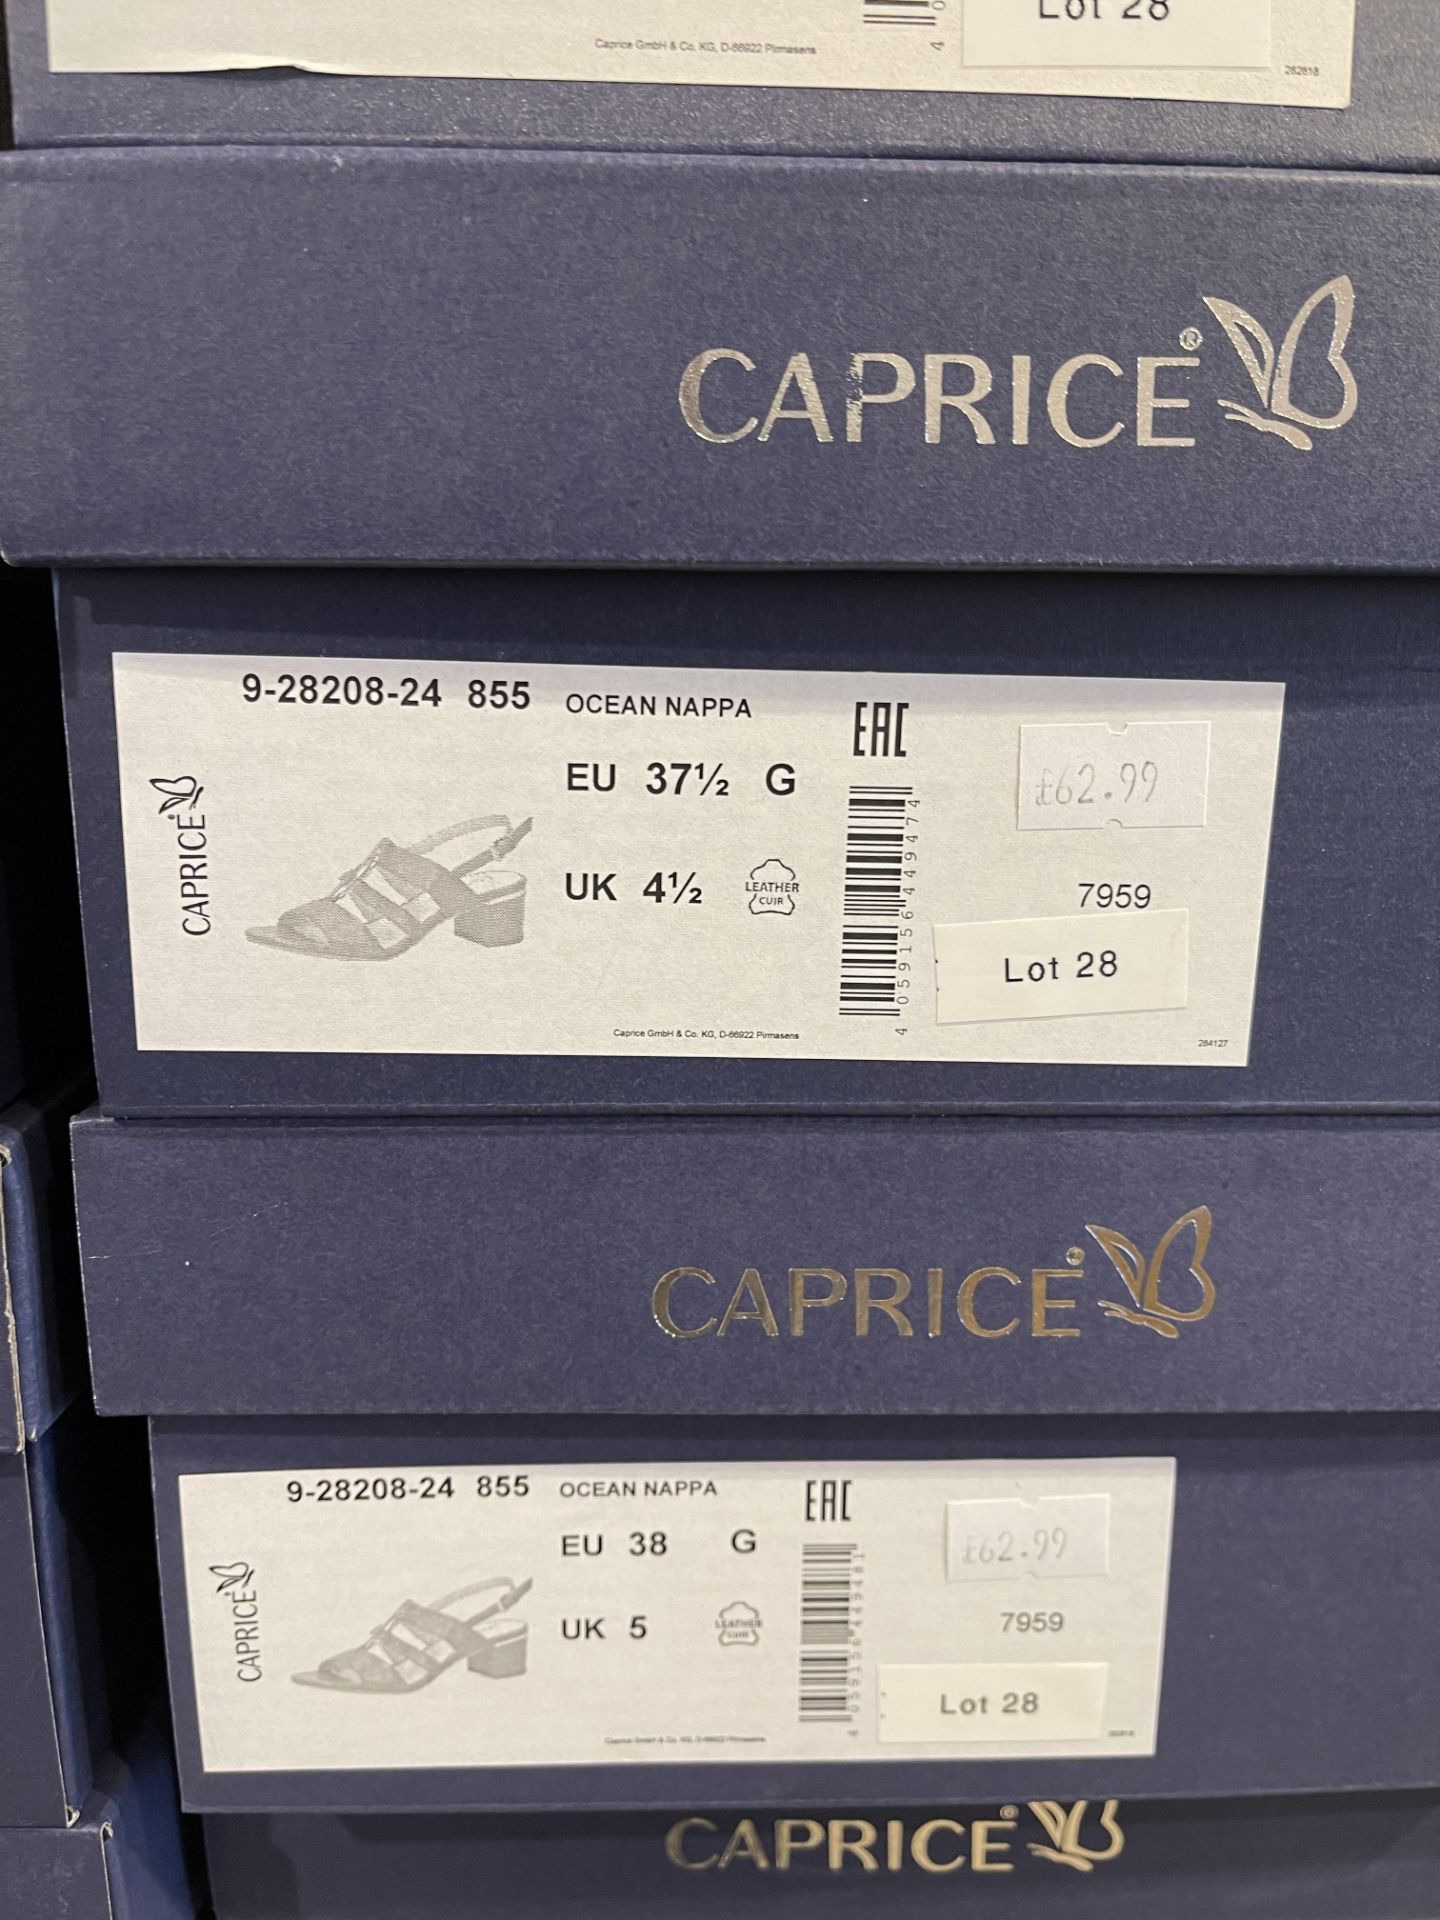 Caprice 10 Pairs: Ocean Nappa Sandals 9-28208-24 855. Sizes 4 - 7 (RRP £62.99) - Image 11 of 12